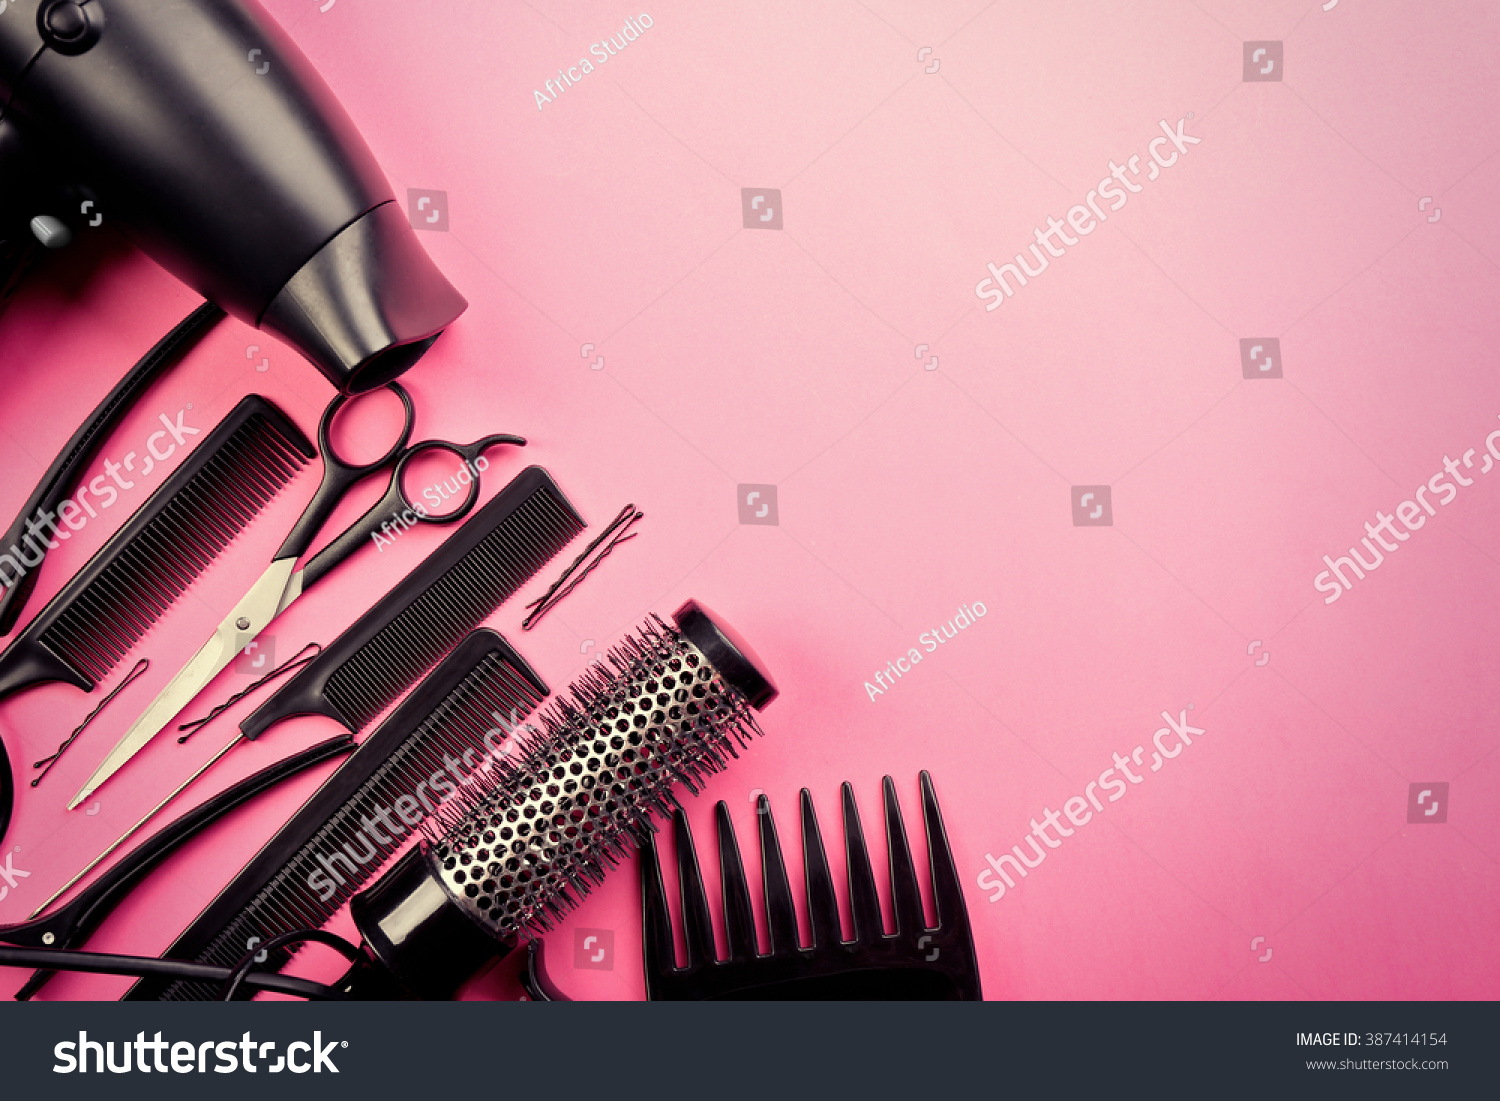 Hairdresser set with various accessories on pink background #387414154